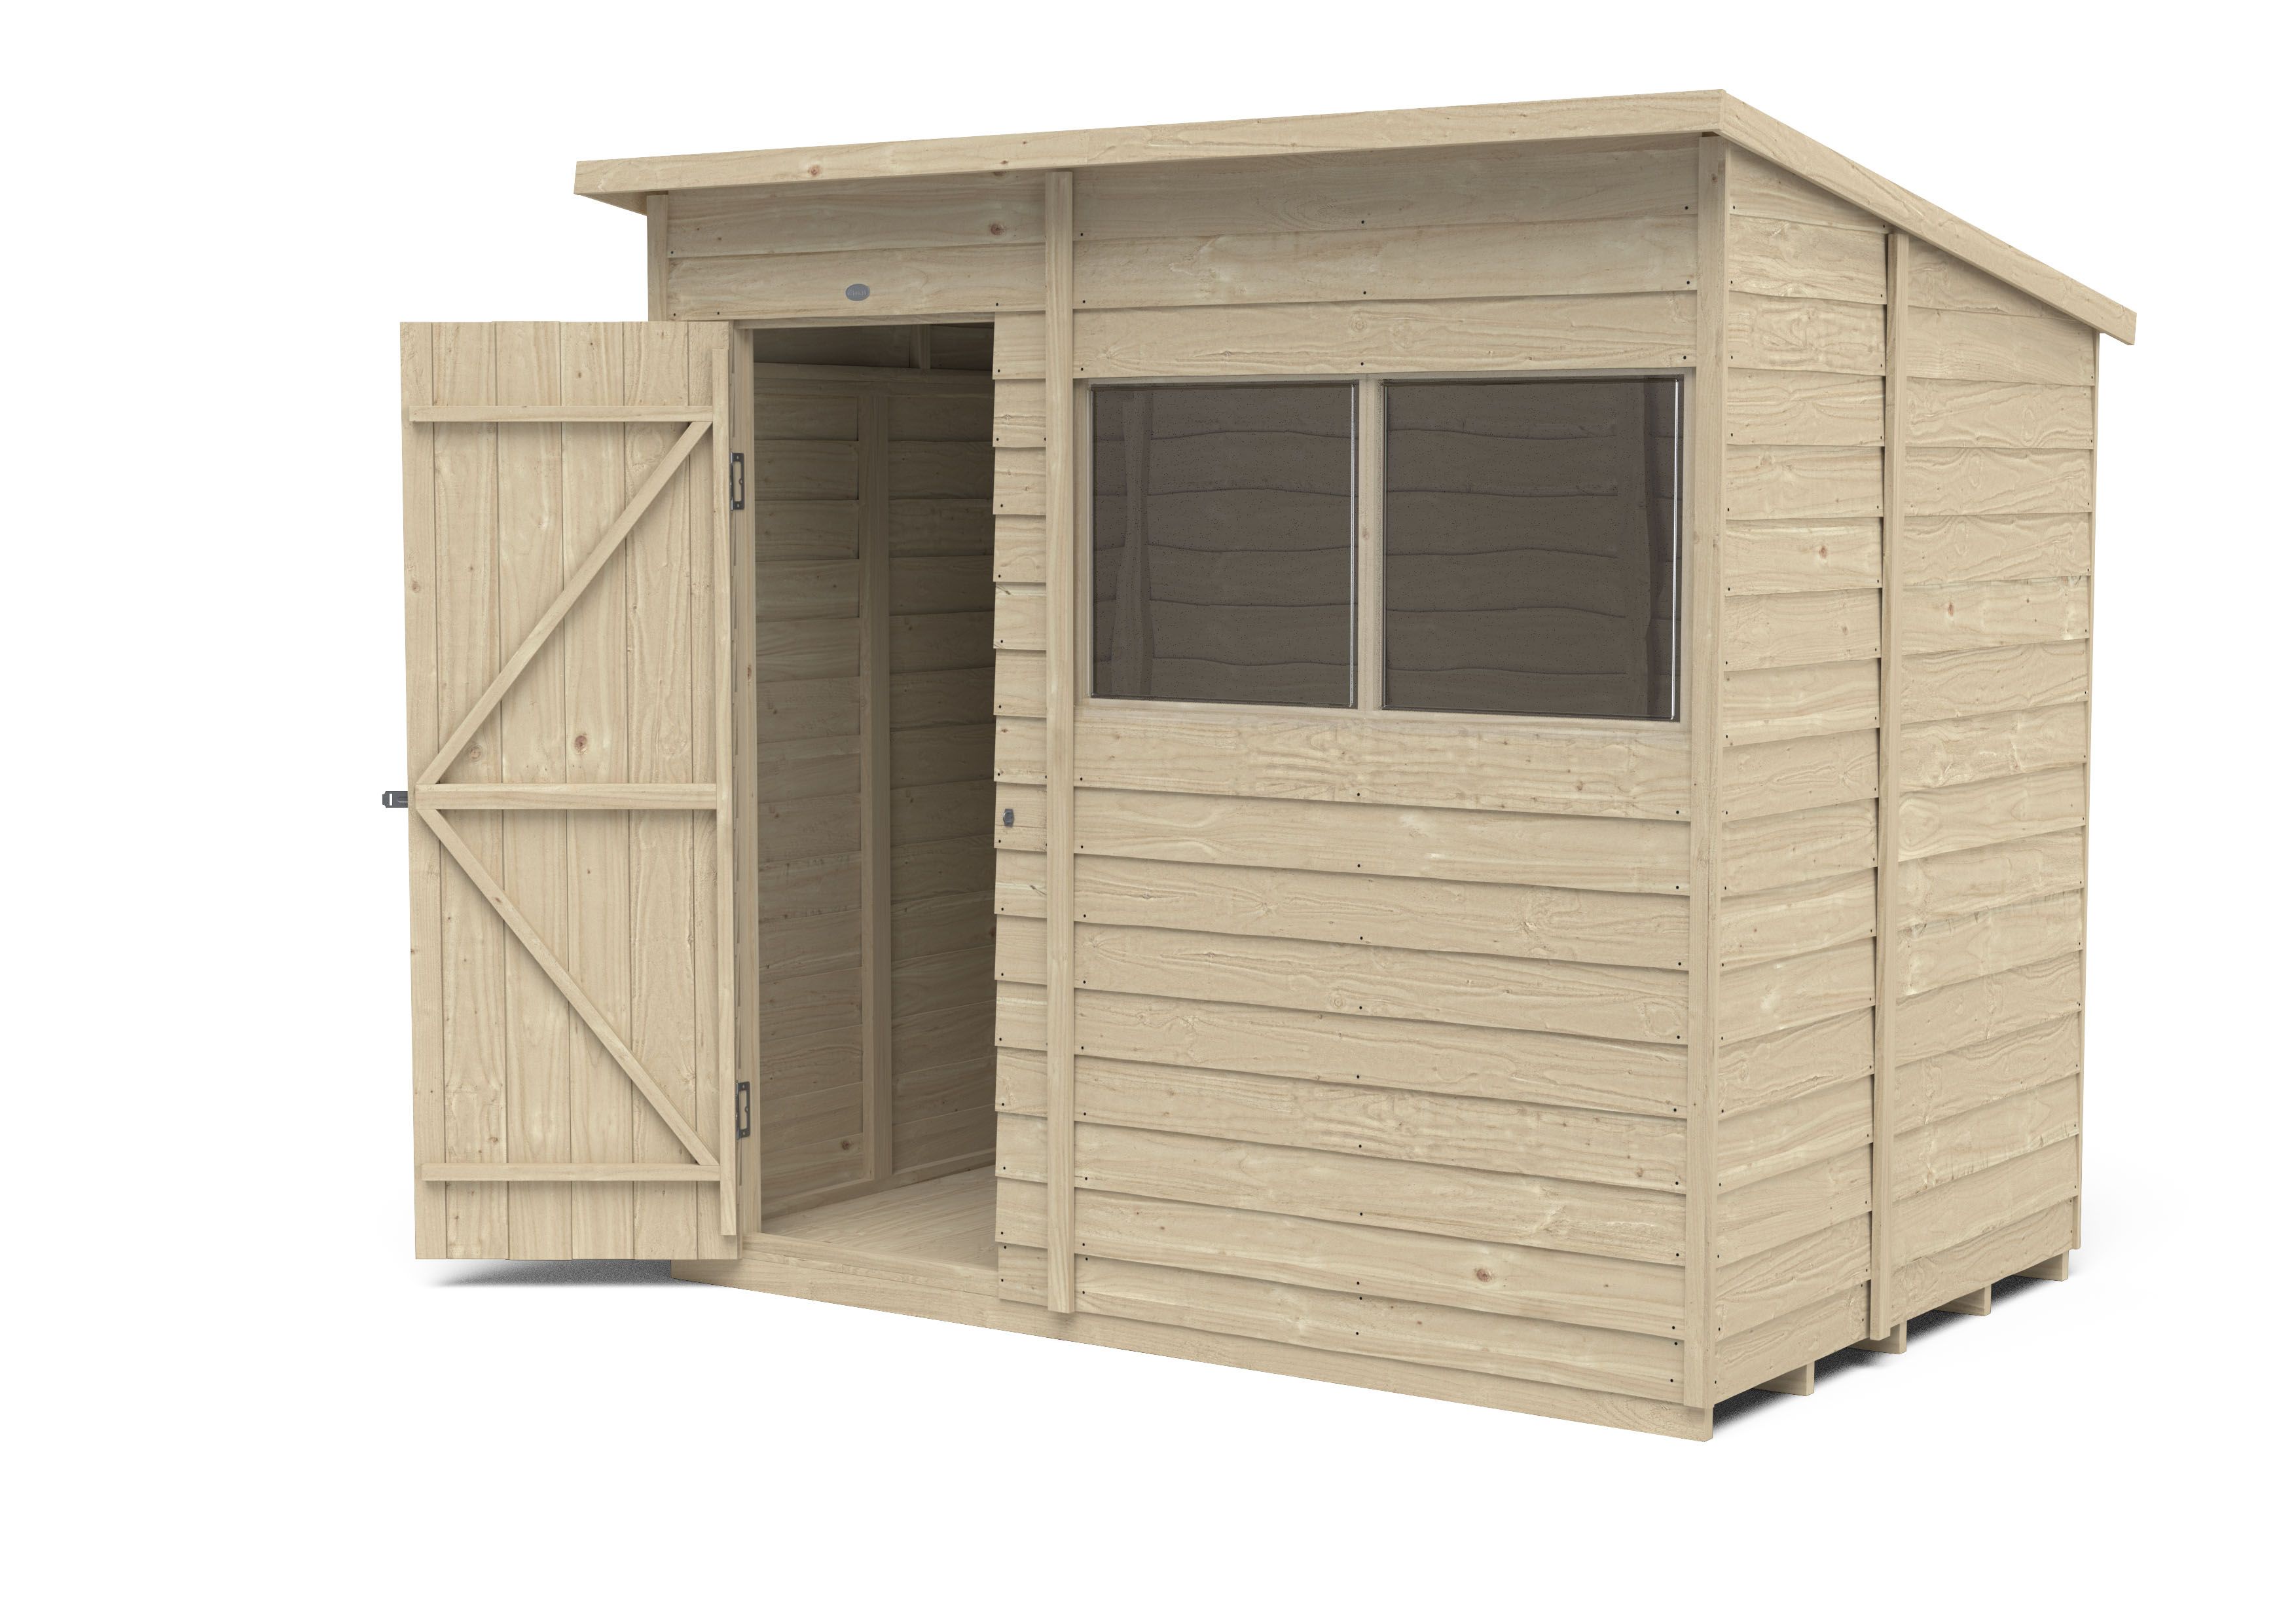 Forest Garden Overlap 7x5 ft Pent Wooden Pressure treated Shed with floor & 2 windows (Base included) - Assembly service included